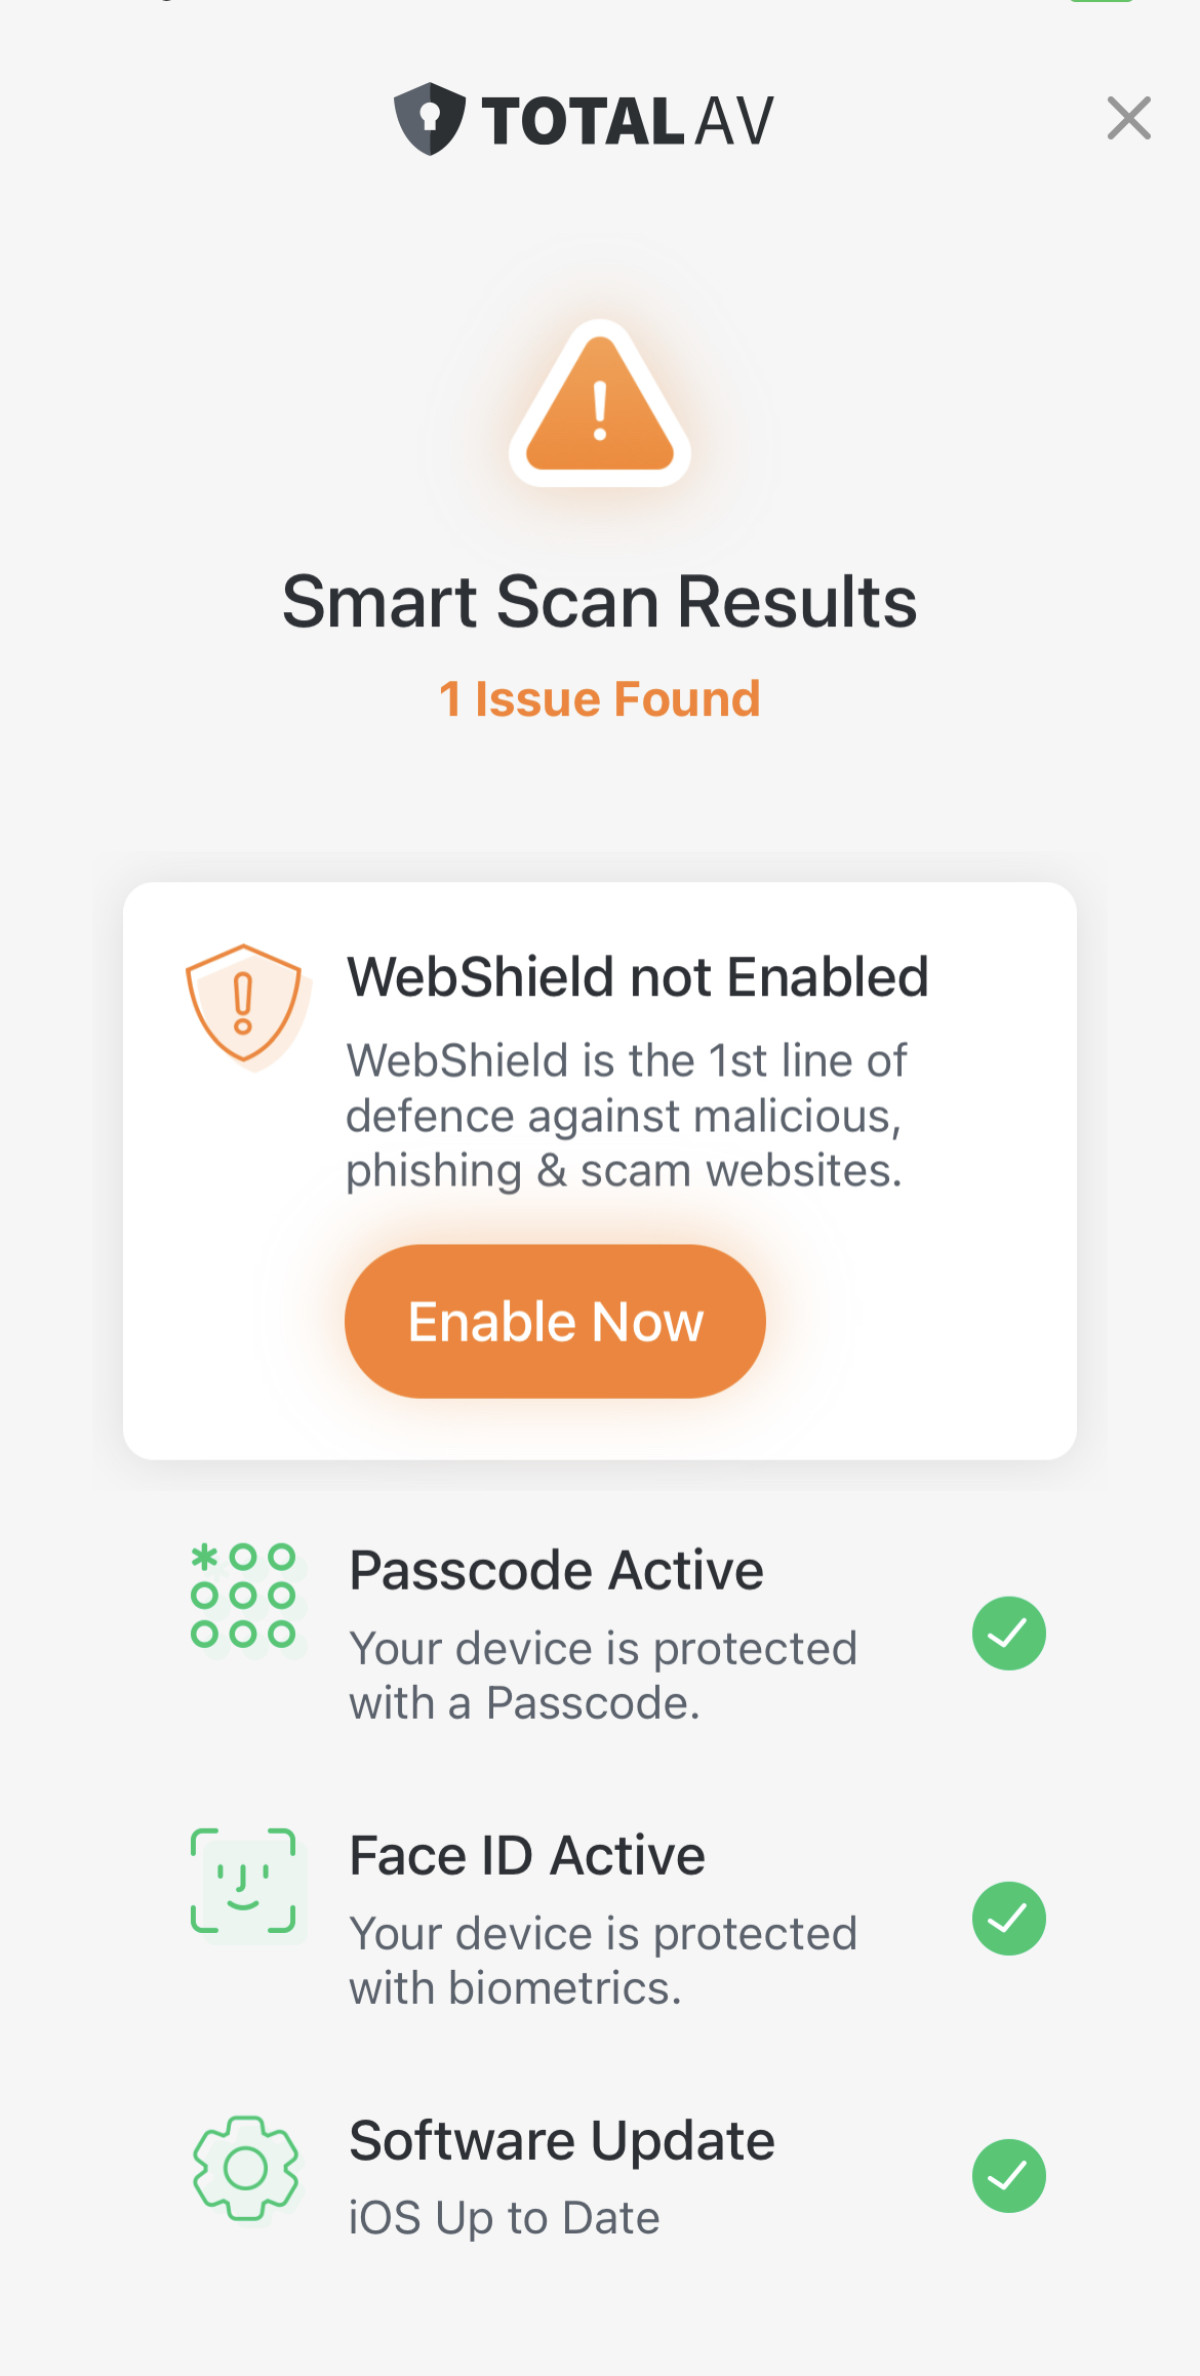 TotalAV Webshield protection on the iPhone